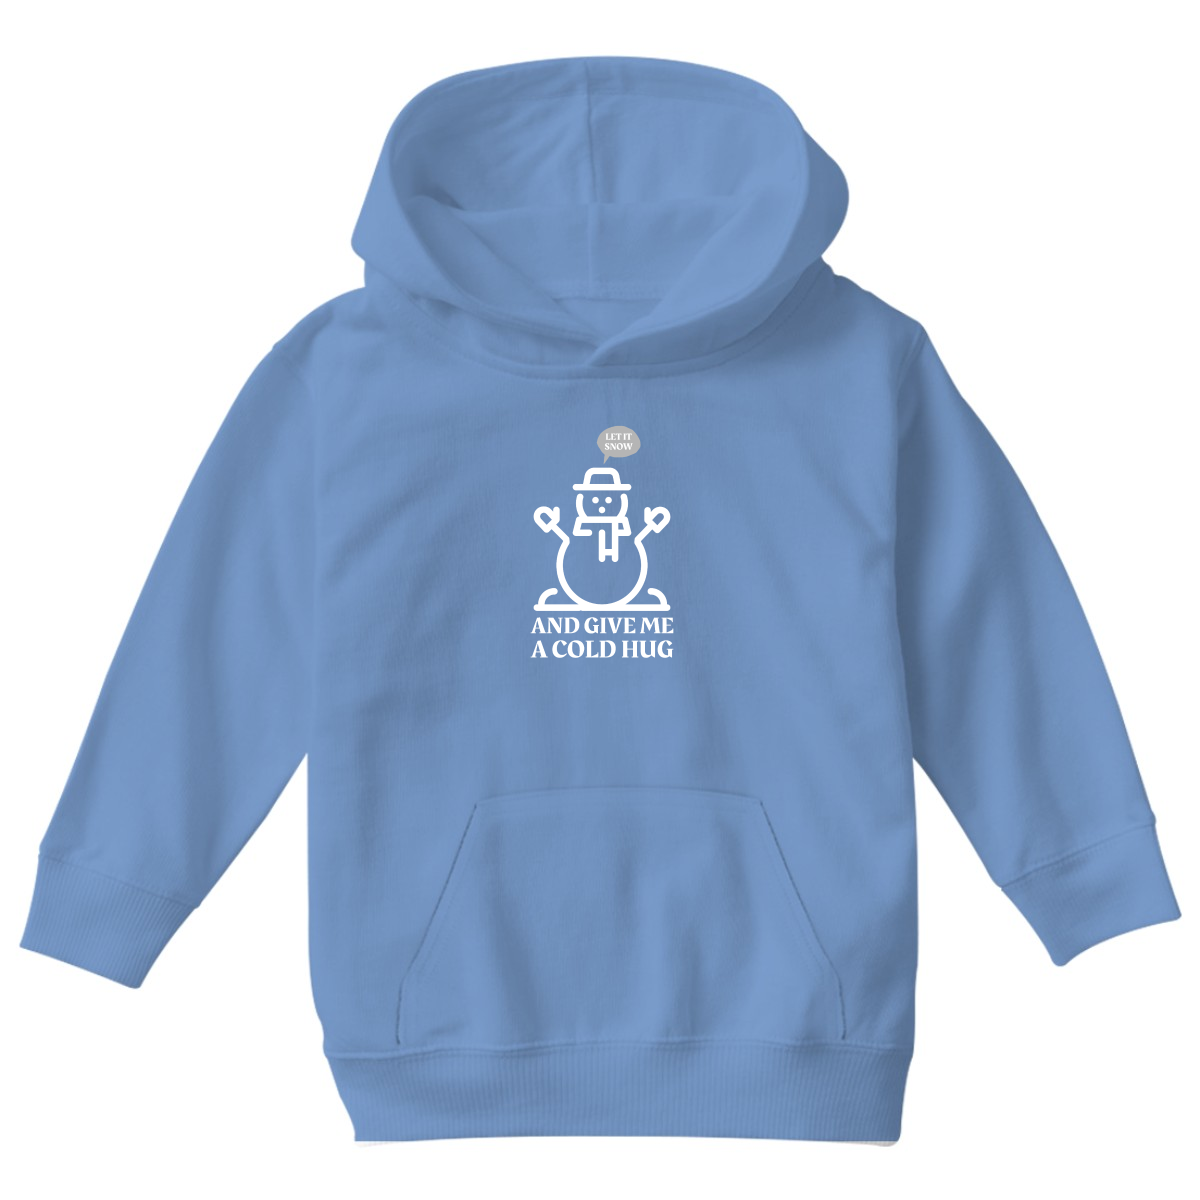 Let It Snow and Give Me a Cold Hug Kids Hoodie | Blue